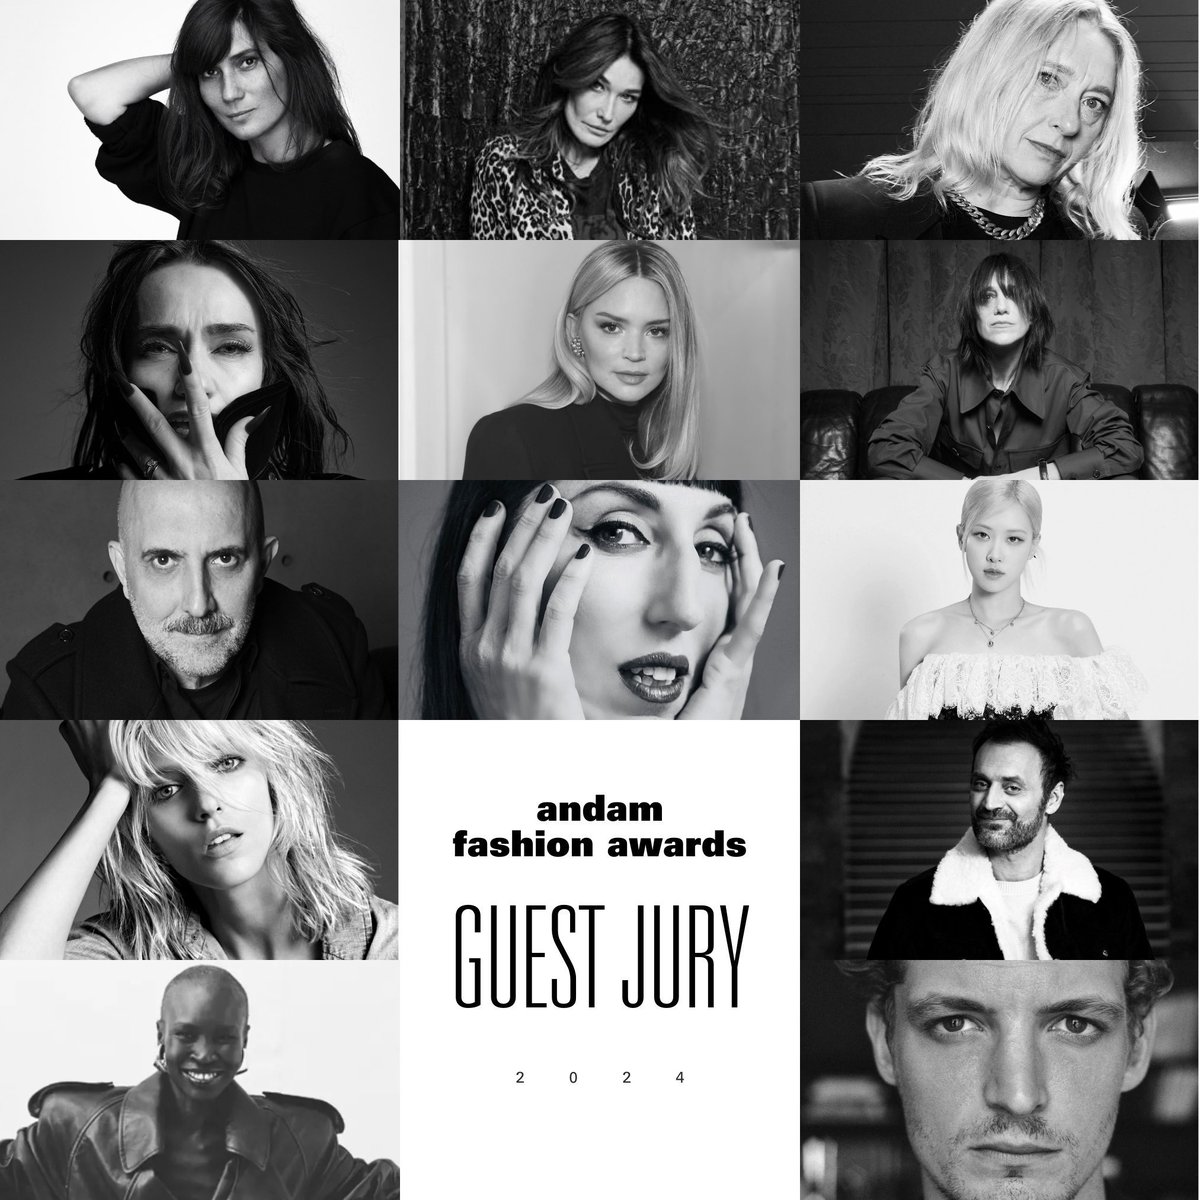 #ROSÉ will be among the 13 guest member selected by Saint Laurent's creative director Anthony Vaccarell to be on this year’s ANDAM prize jury.

trib.al/o9TQpF7 
#블랙핑크 #로제 @BLACKPINK